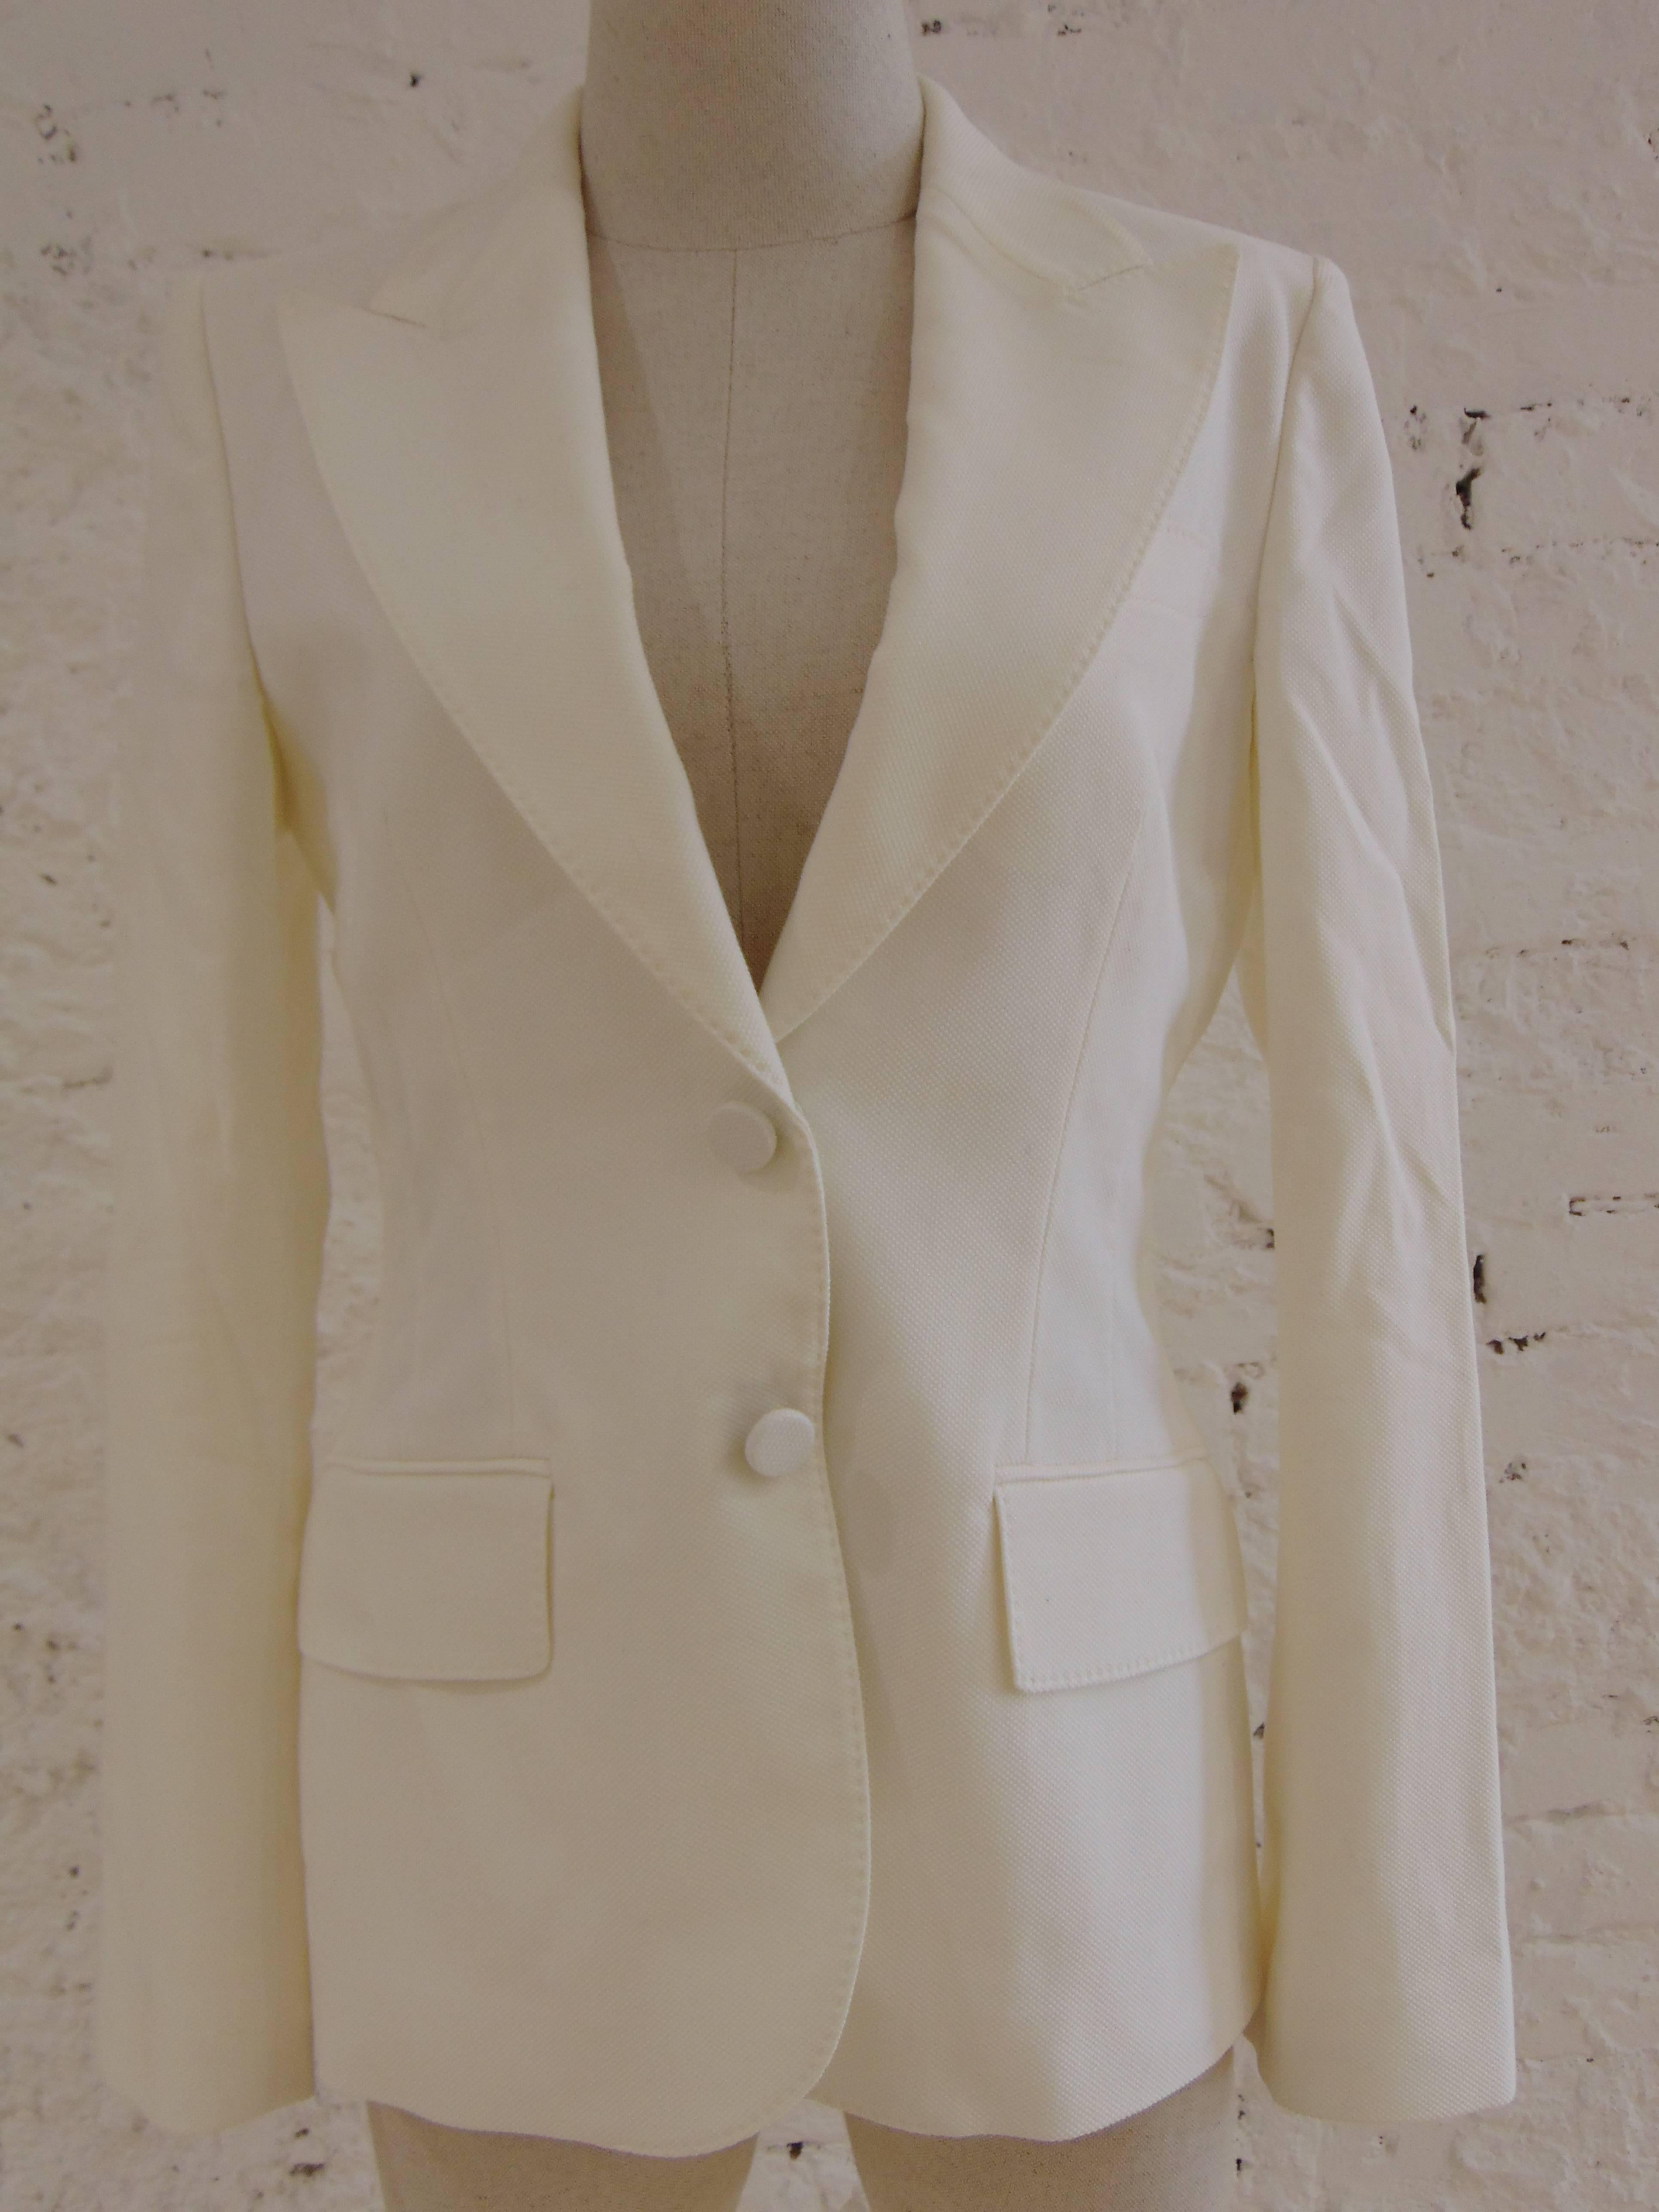 Dolce & Gabbana cotton white jacket
totally made in italy in size 44